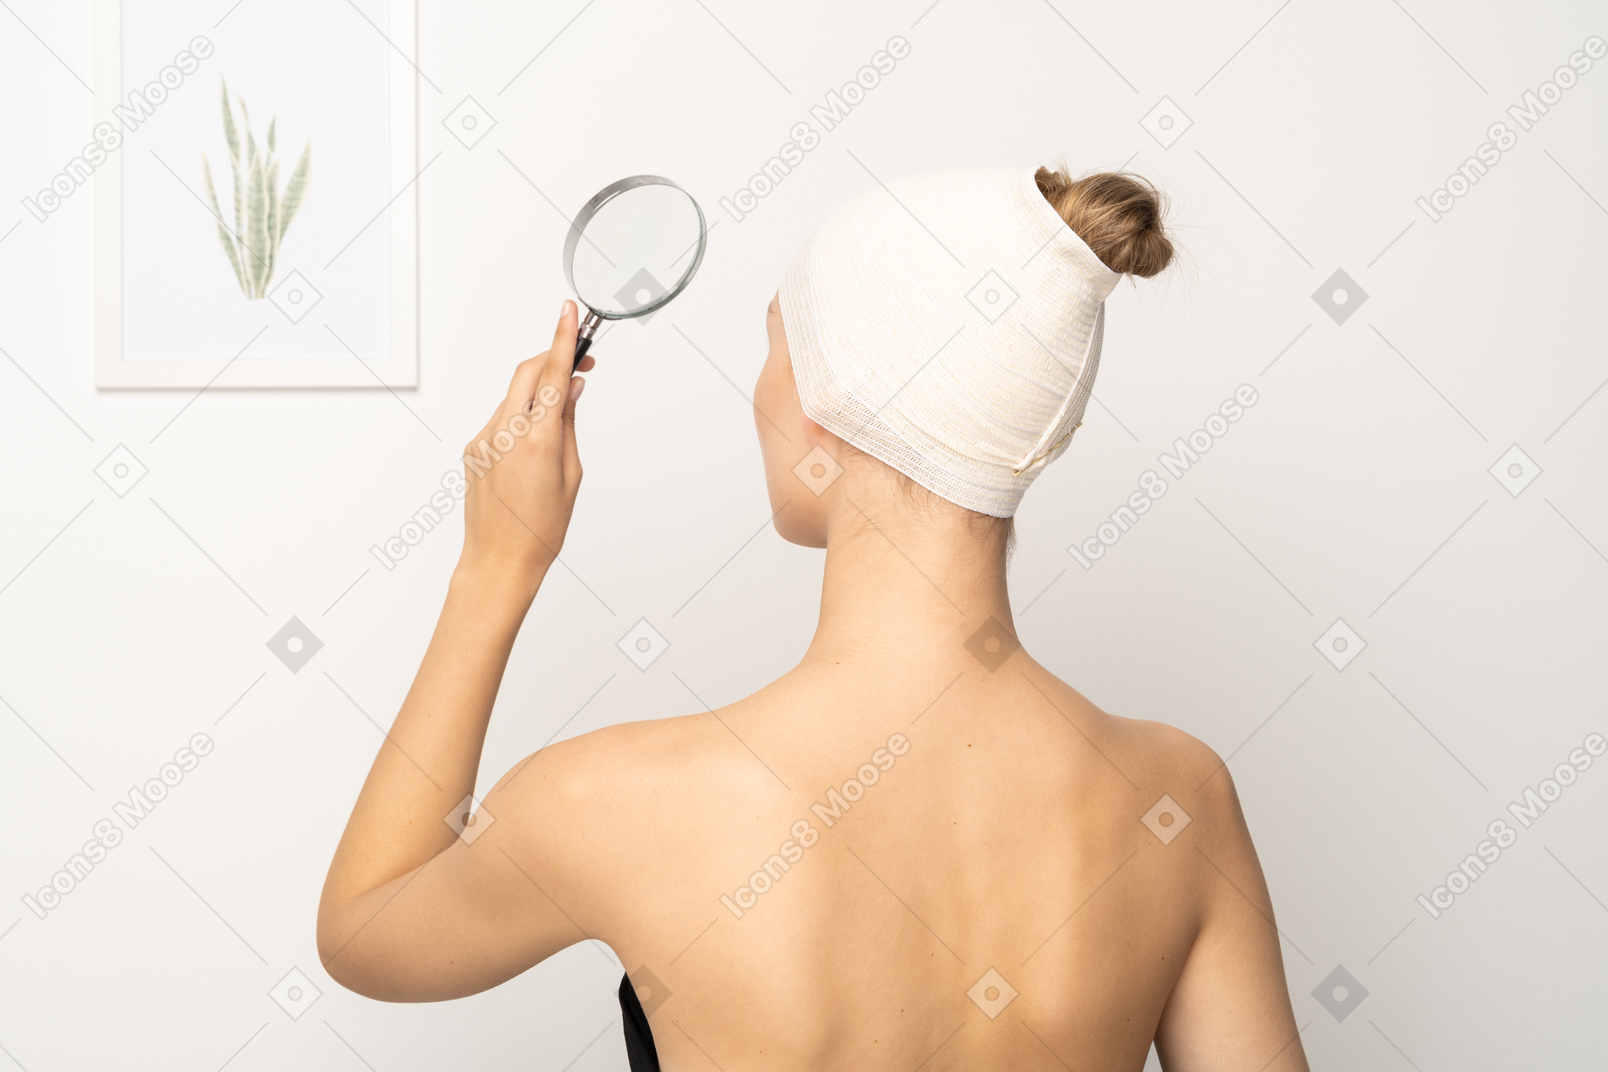 Back view of a woman holding up magnifying glass